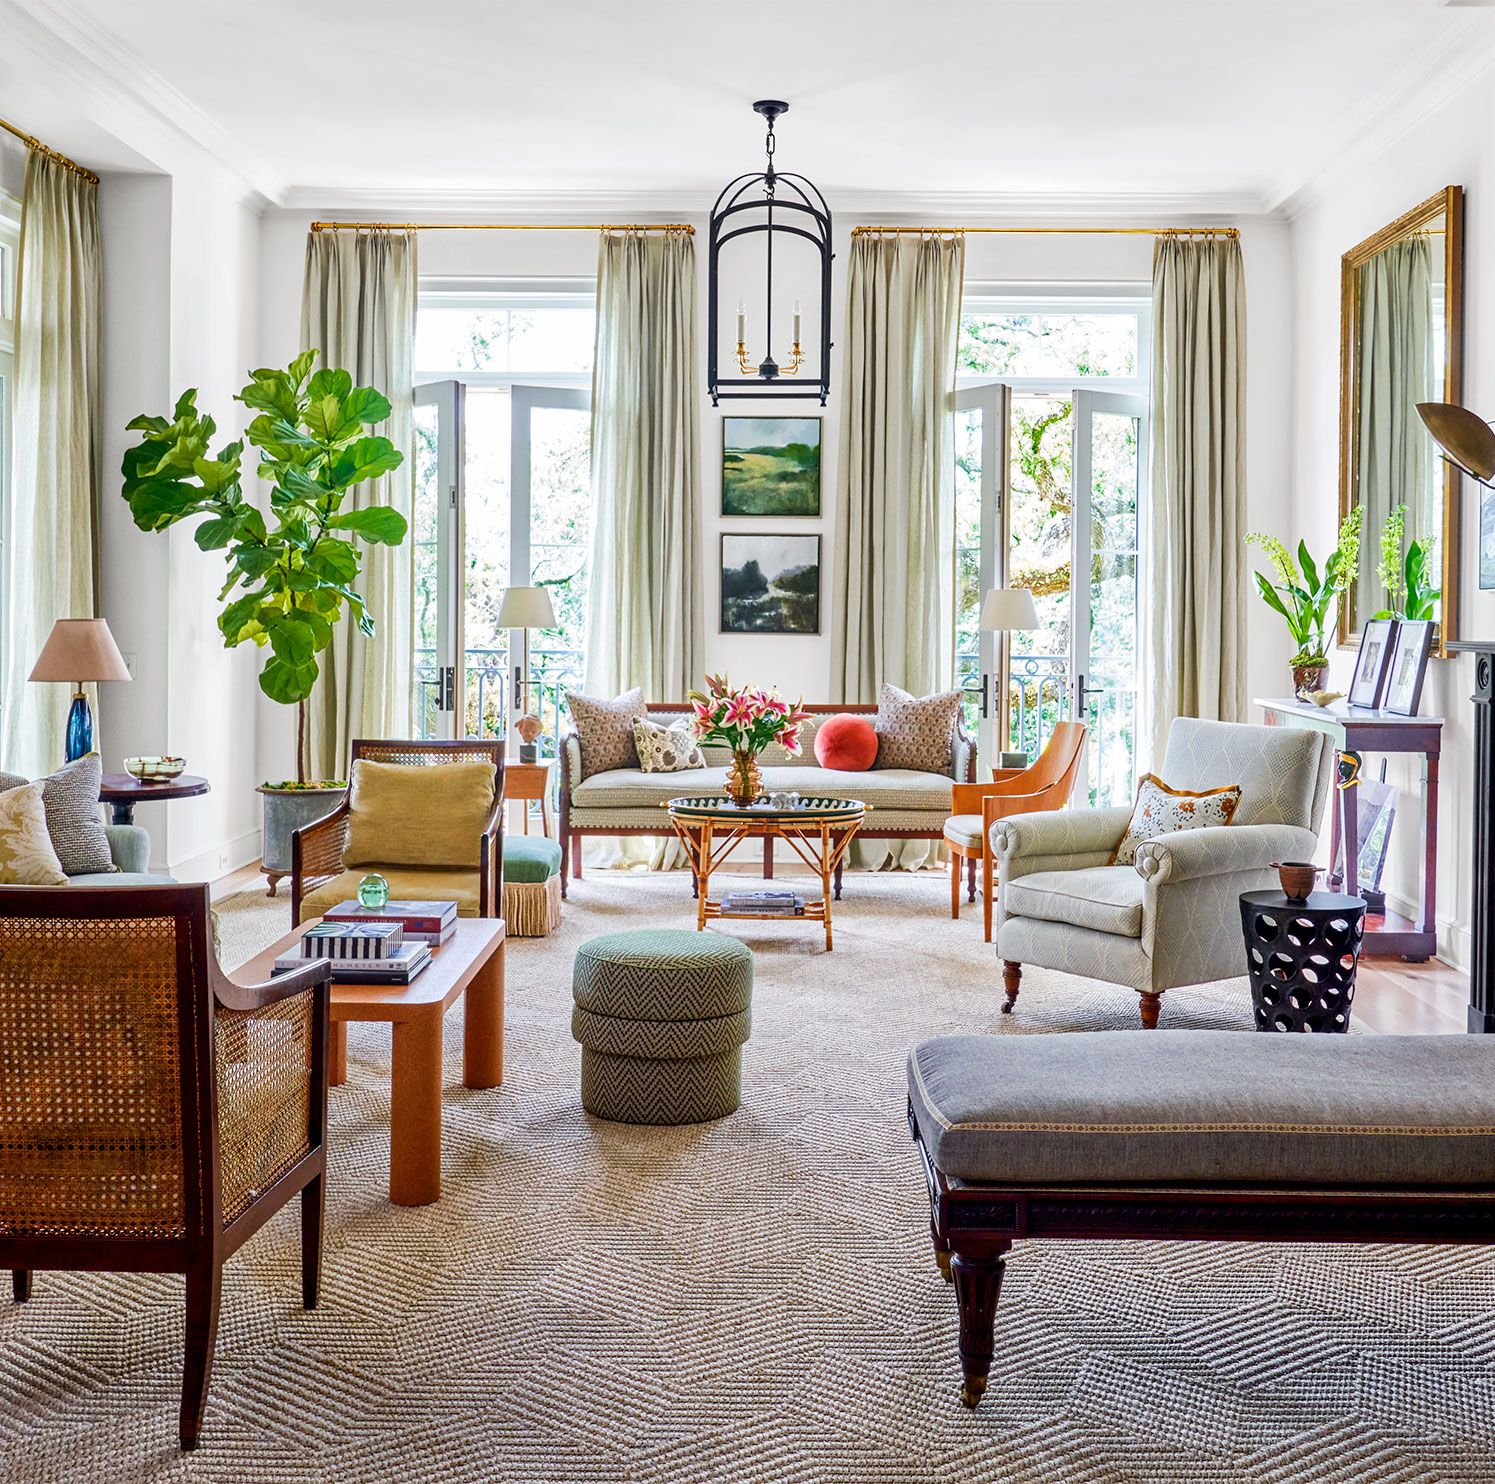 With 12-Foot Ceilings and a Dash of Southern Charm, This House Is a Love Letter to New Orleans